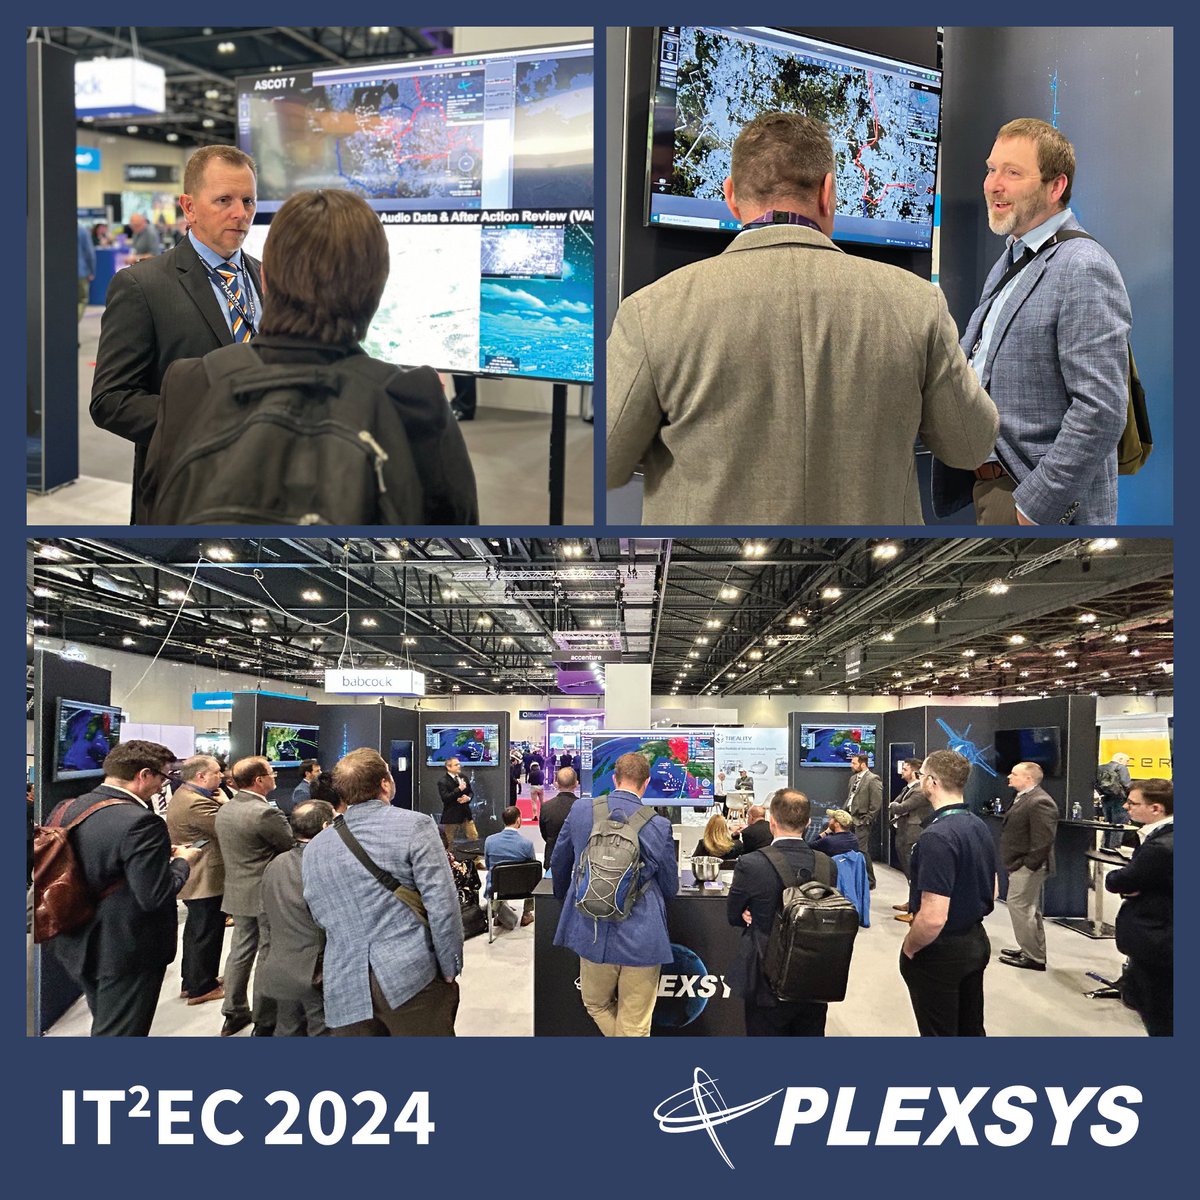 We appreciate those who visited our stand and attended our special events this week at #ITEC2024! Our team enjoyed demonstrating the power of the PLEXSYS #modelingandsimulation solutions working together to create the best training for our #Warfighters!